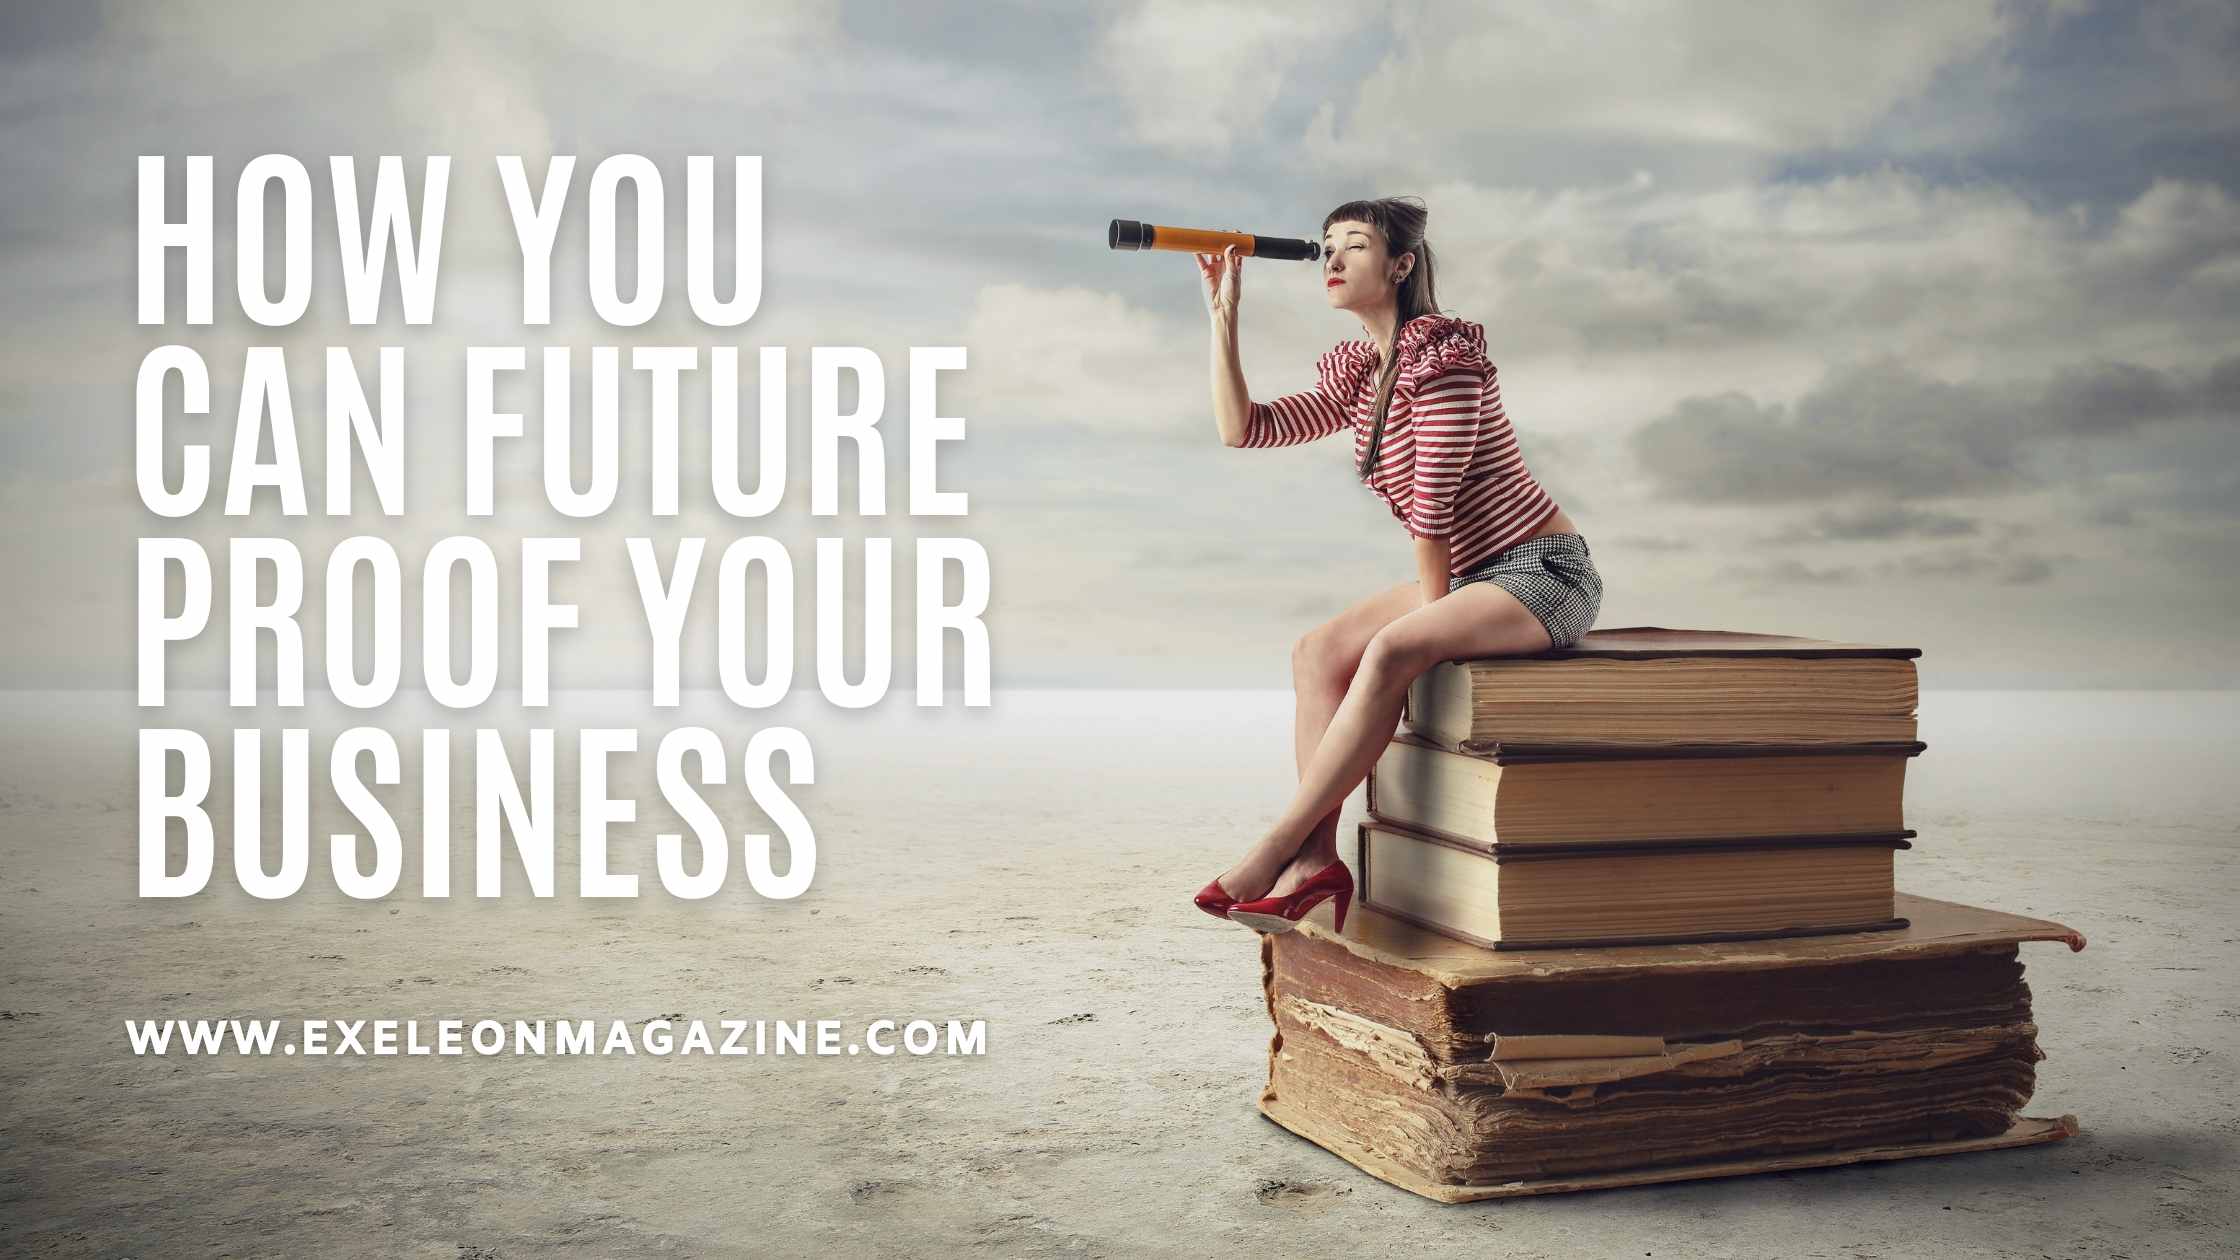 Here’s How you can Future Proof your Business